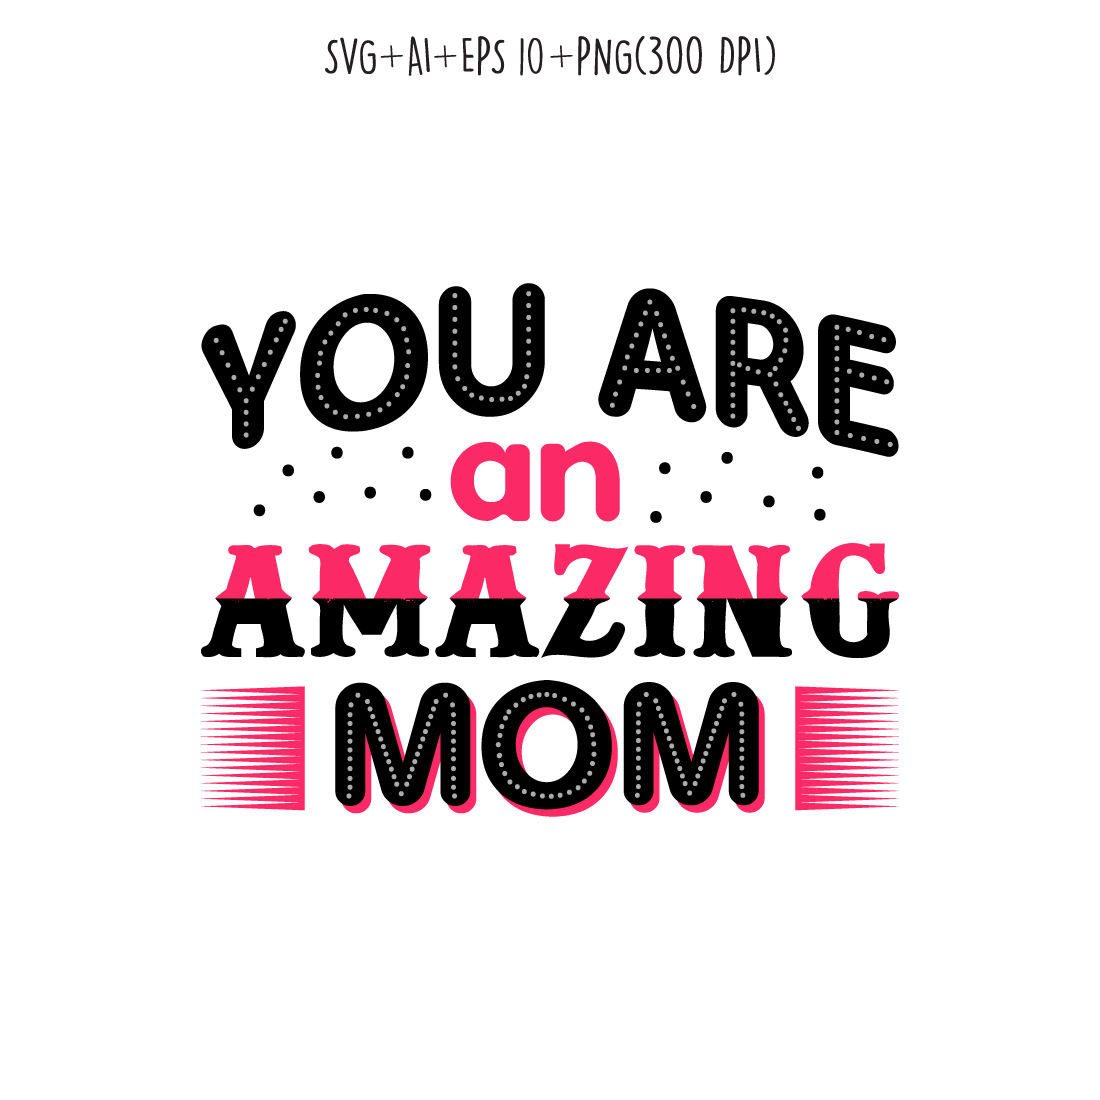 You are my amazing mom design for t-shirts, cards, frame artwork, phone cases, bags, mugs, stickers, tumblers, print, etc preview image.